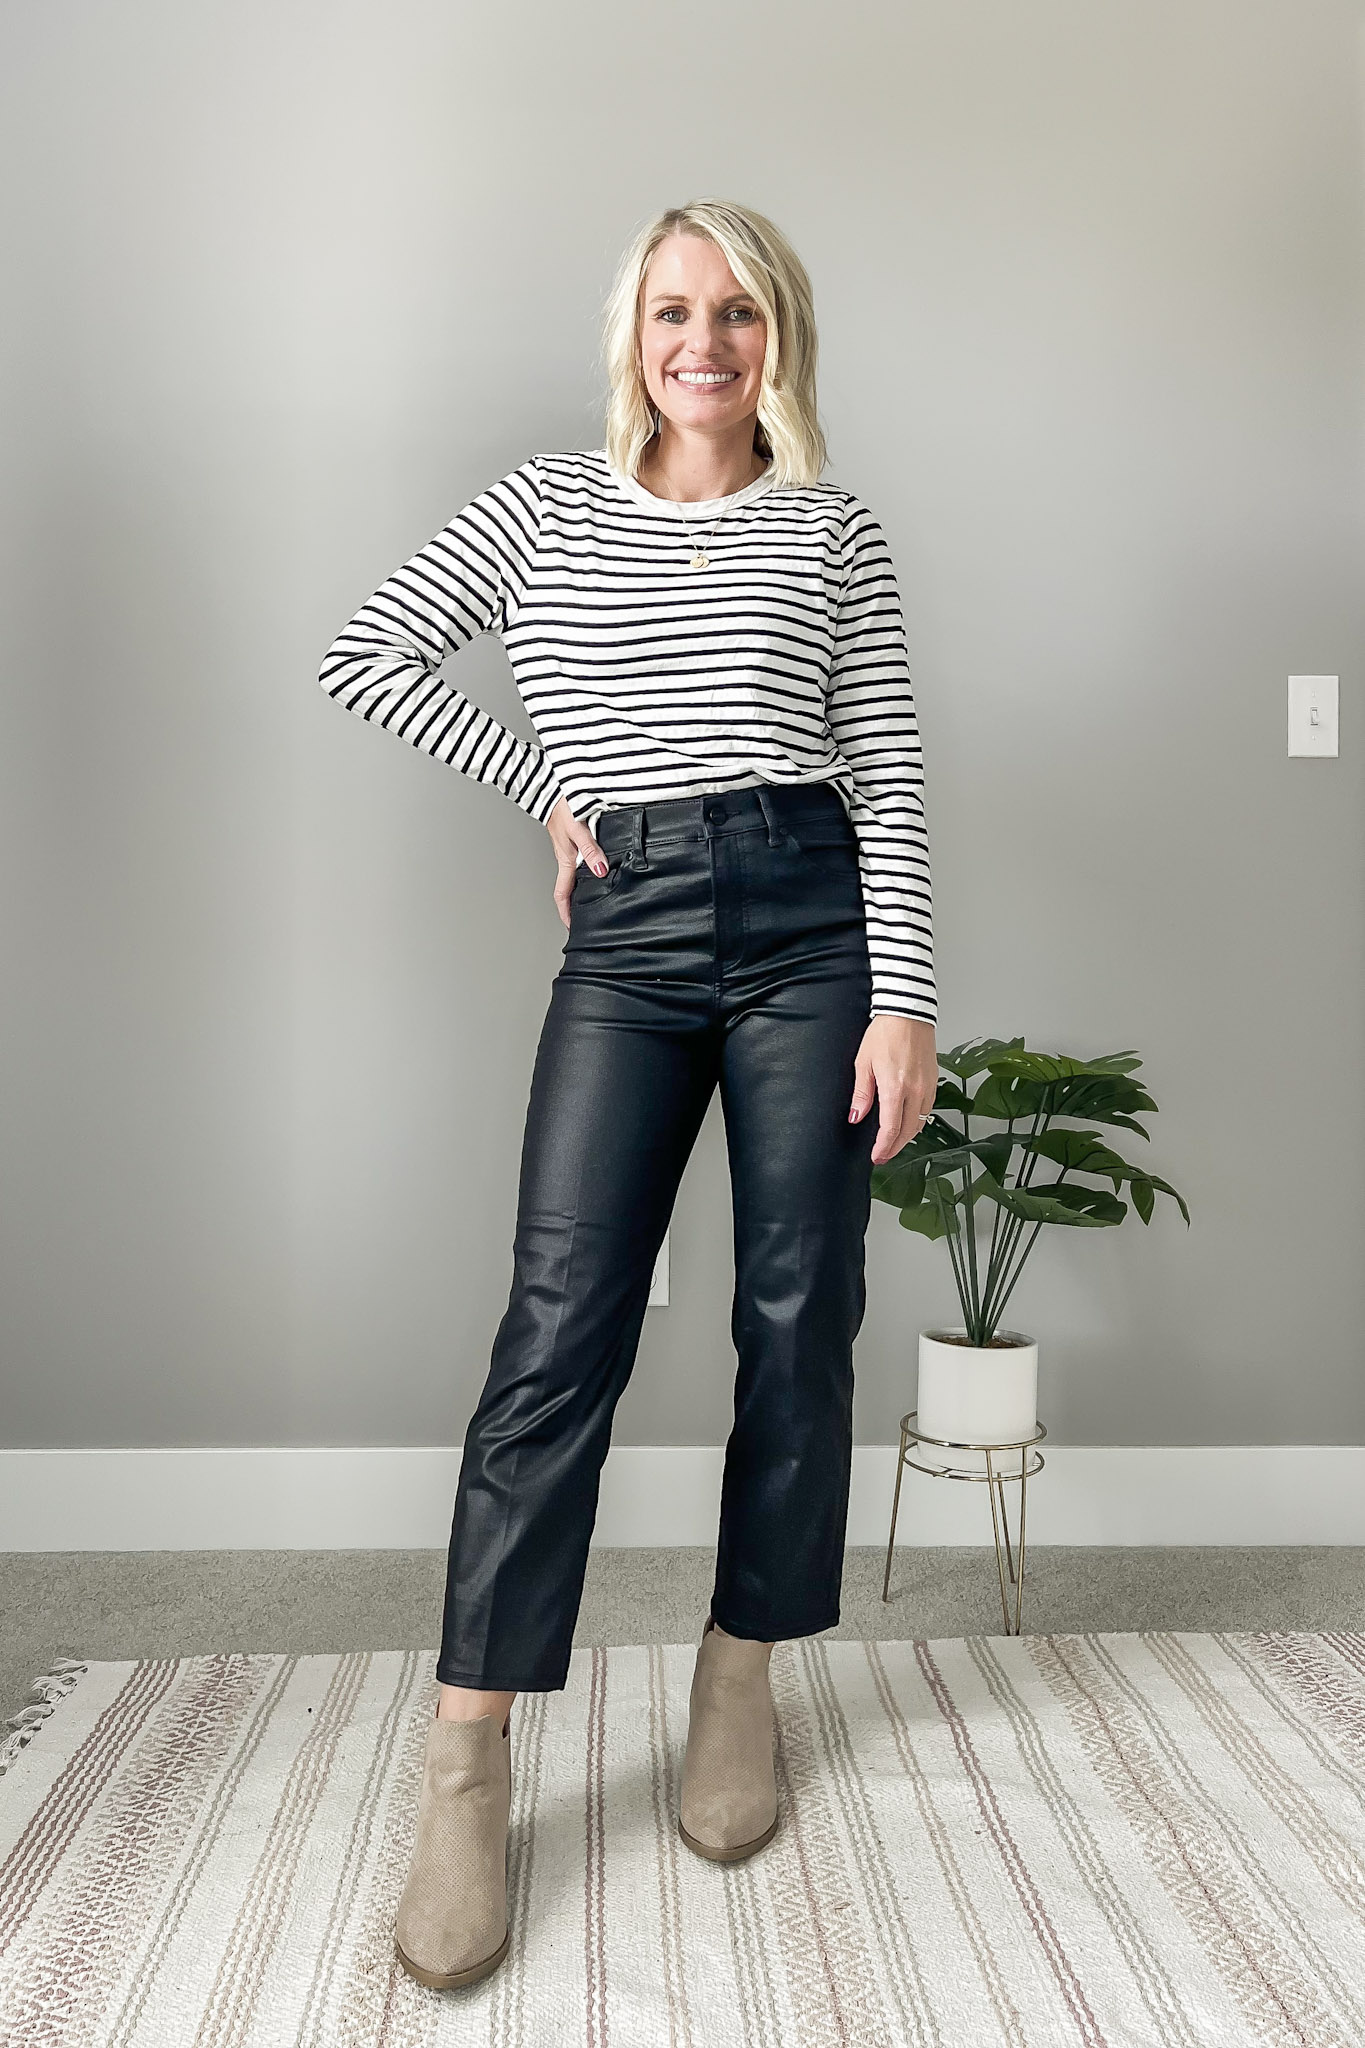 Coated black jeans with striped top